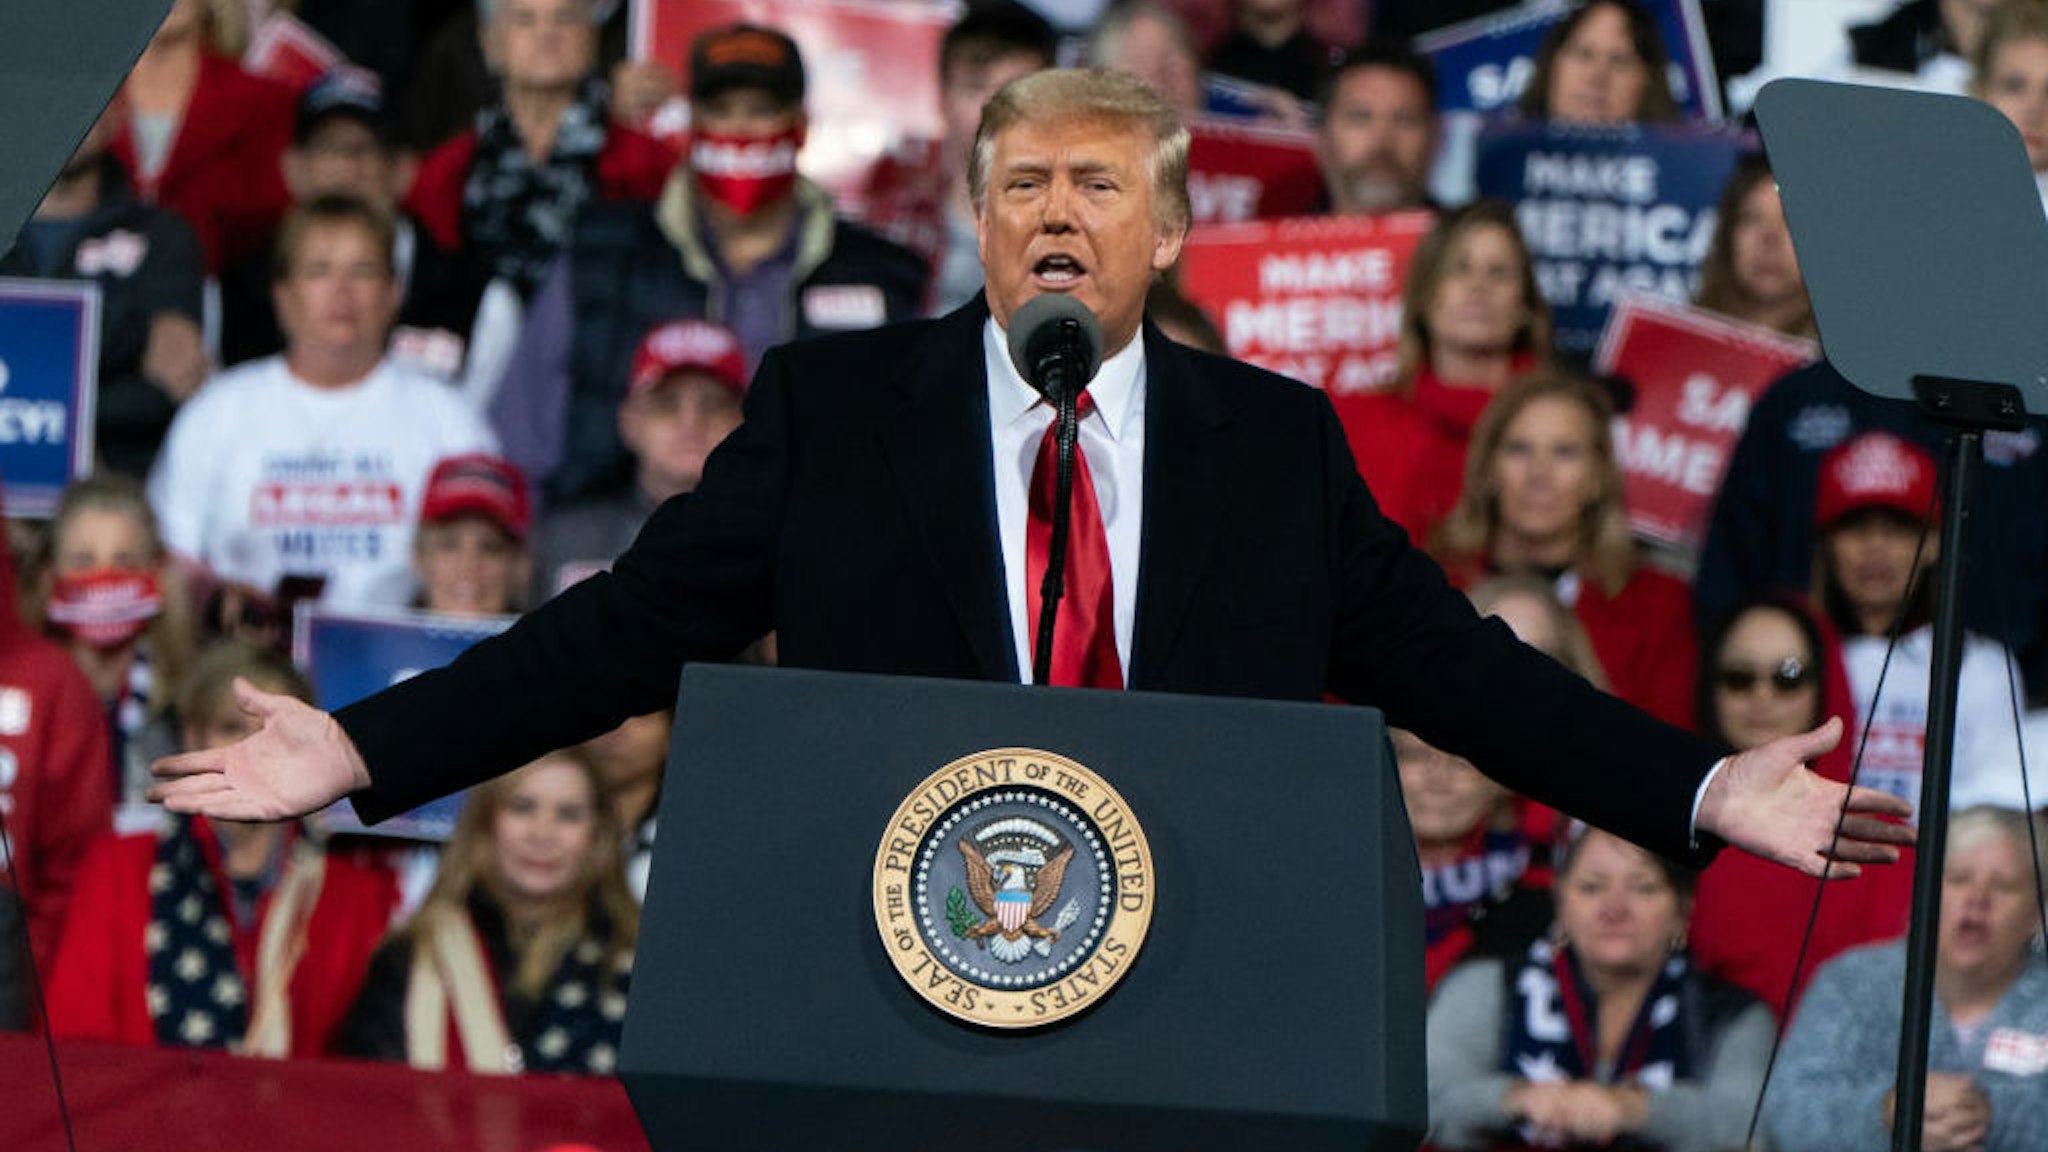 U.S. President Donald Trump speaks during a rally in Valdosta, Georgia, U.S., on Saturday, Dec. 5, 2020. Trump berated Georgia’s Republican governor before heading to the state to campaign for two key Senate candidates, keeping up attacks that party leaders worry could backfire. Photographer: Elijah Nouvelage/Bloomberg